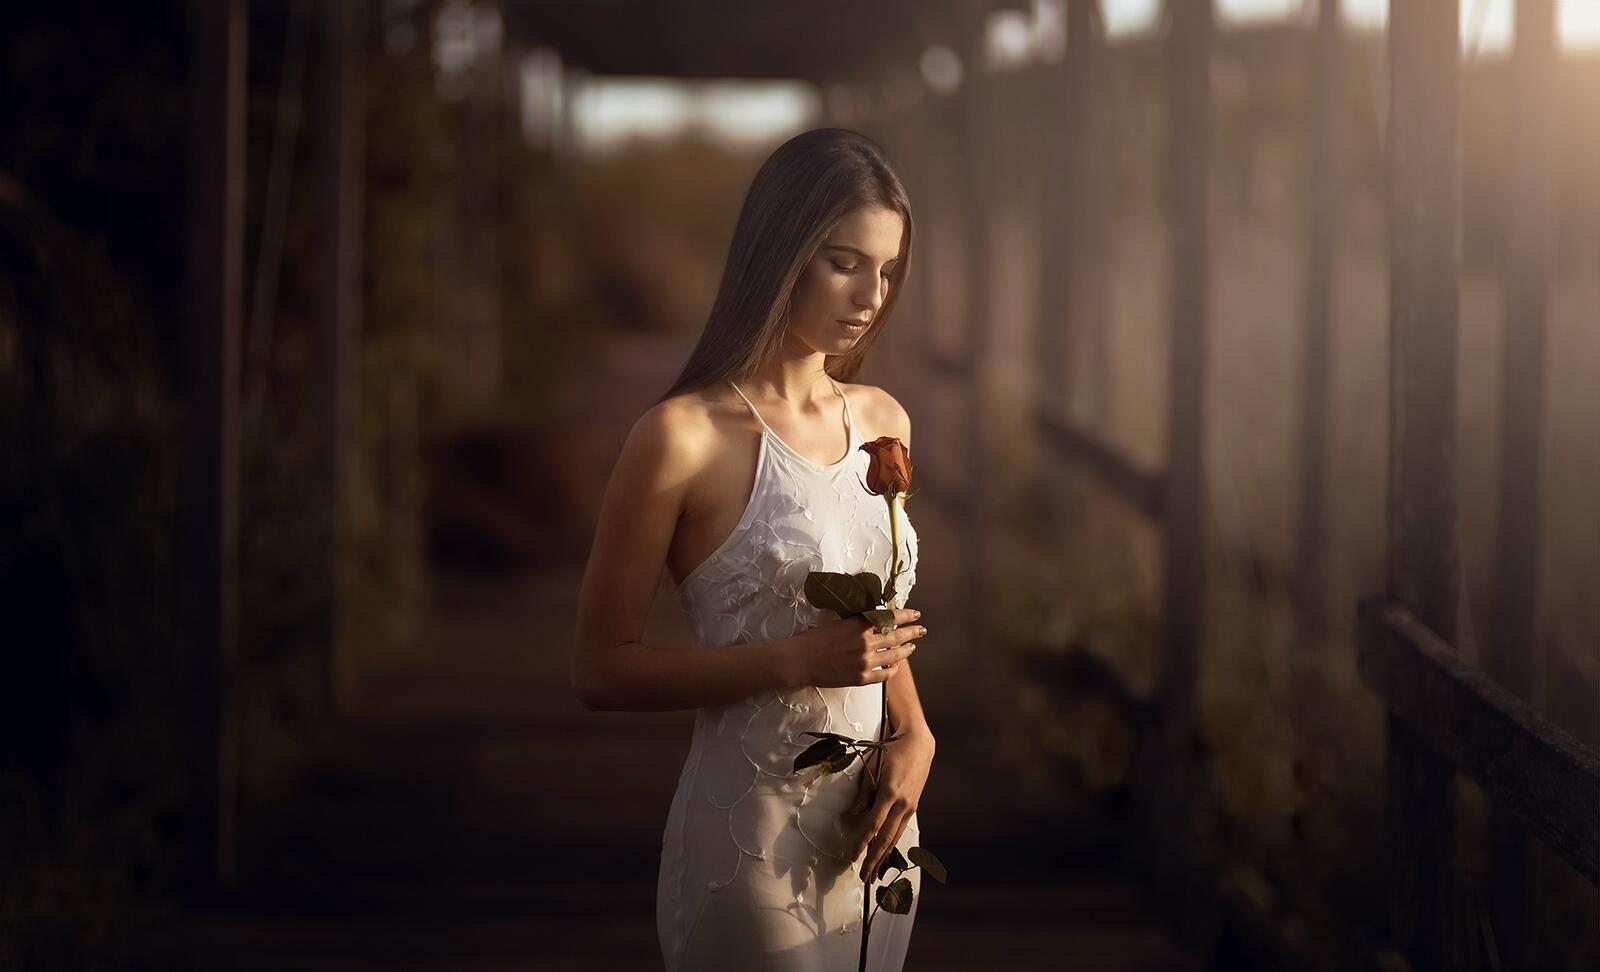 Free photo A girl in a white dress with a rose in her hands